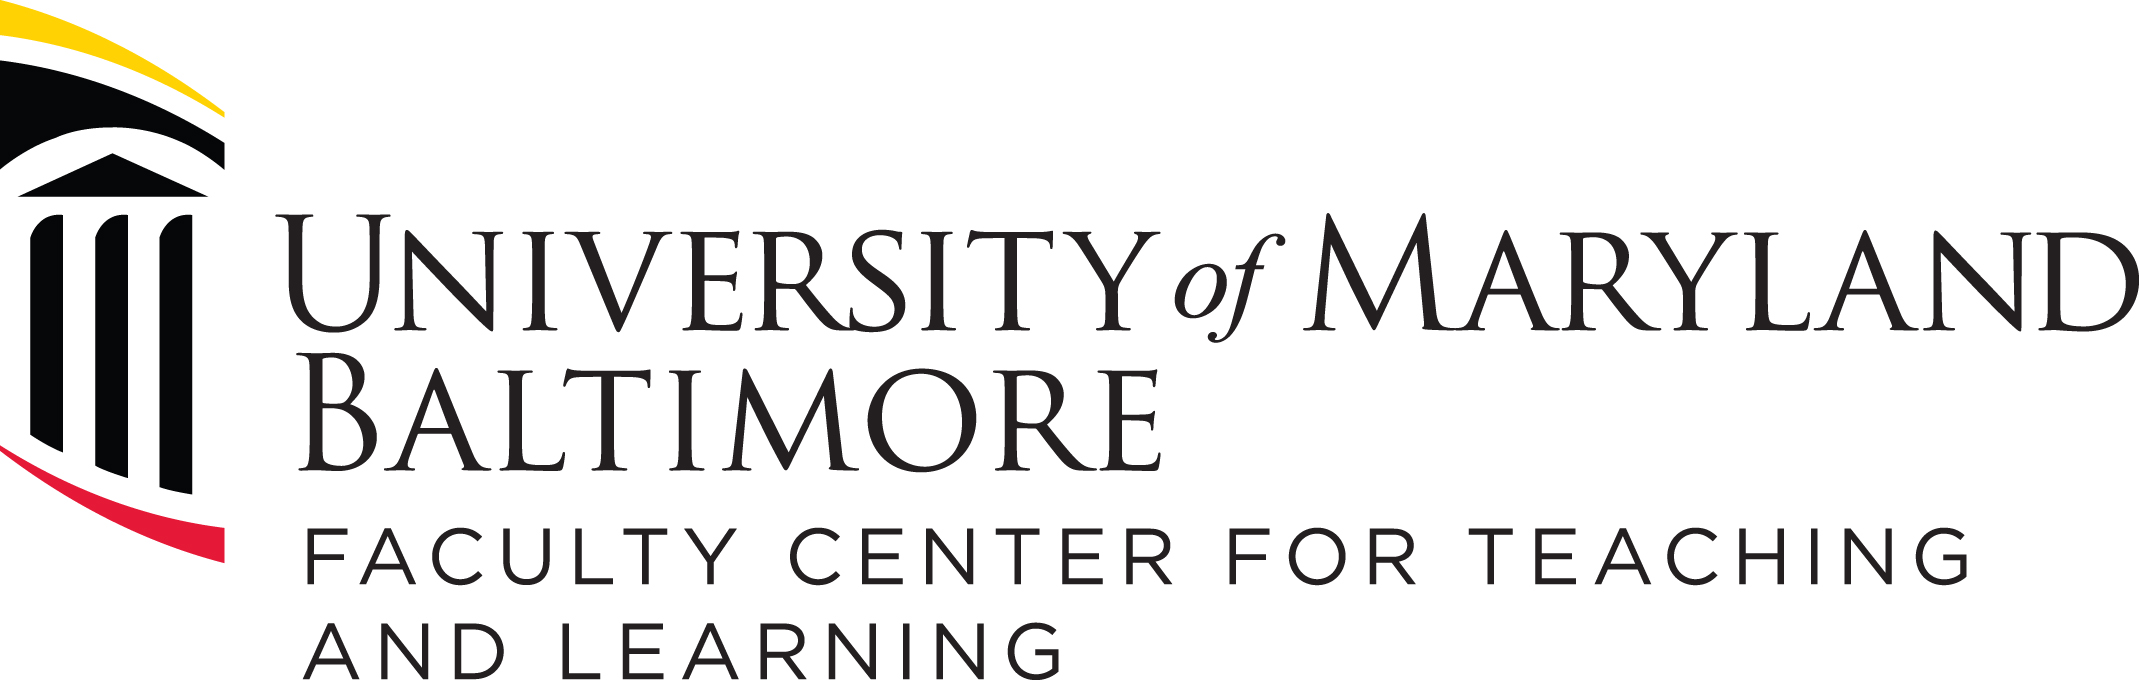 Faculty Center for Teaching and Learning logo